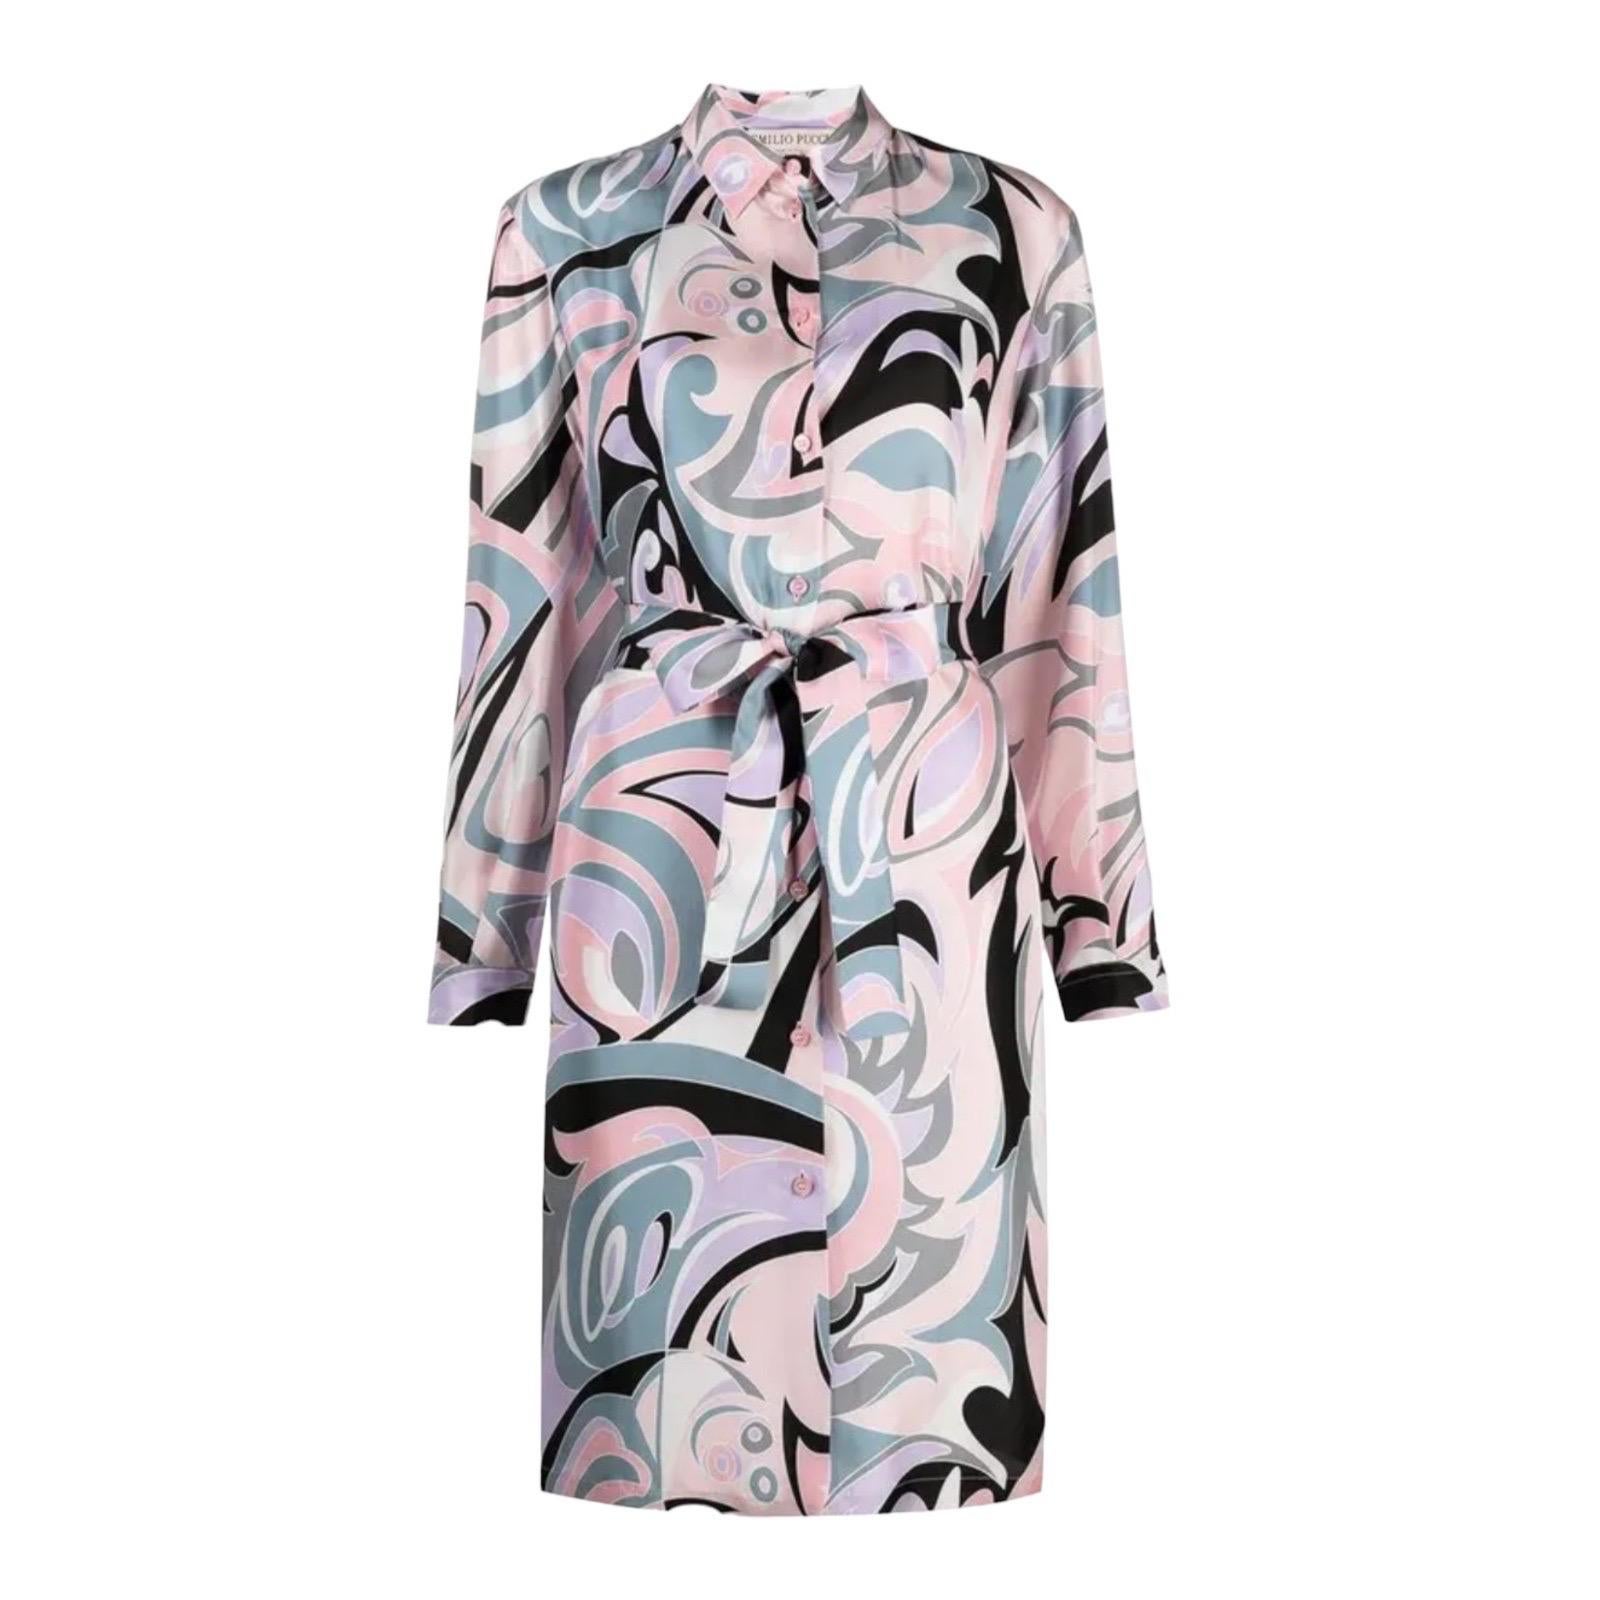 NEW Emilio Pucci Signature Print Silk Shirt Dress with Belt 44 For Sale 2